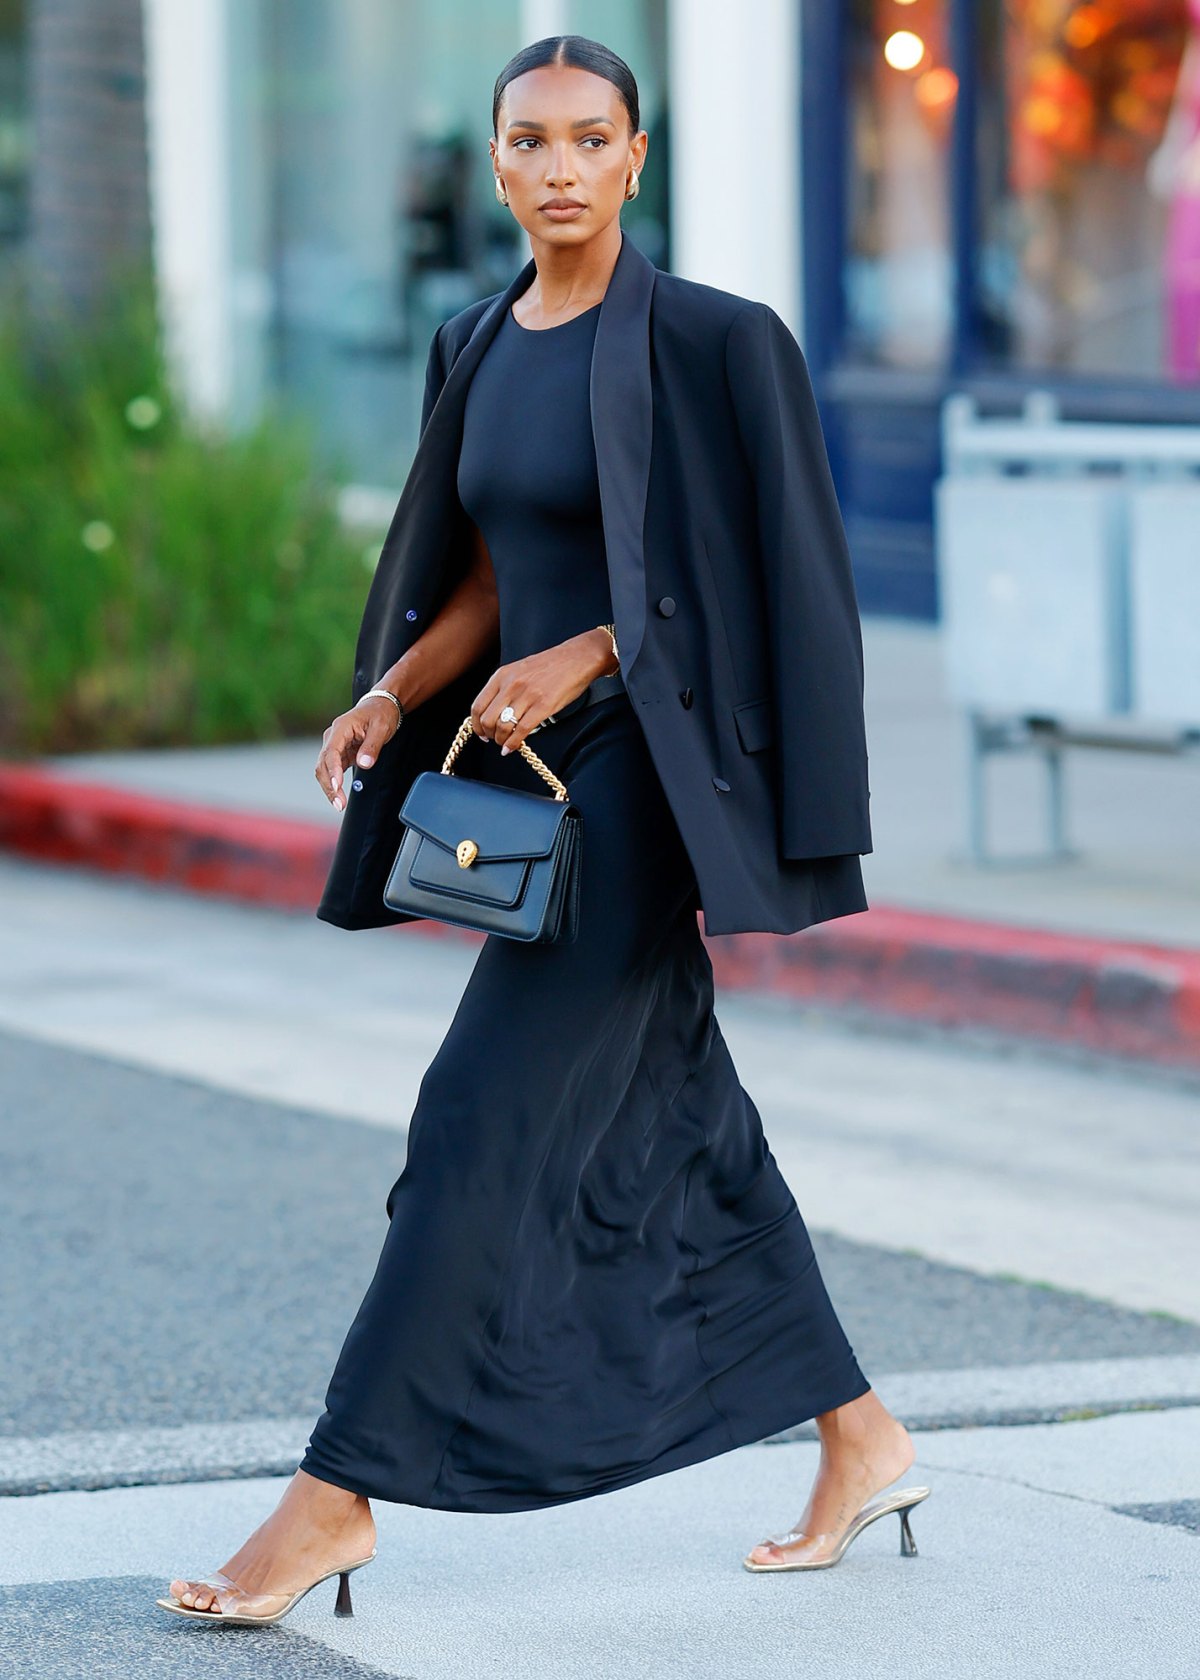 Photos from Celebrity Street Style - E! Online in 2023  Celebrity street  style, Maxi dress pattern, Street style